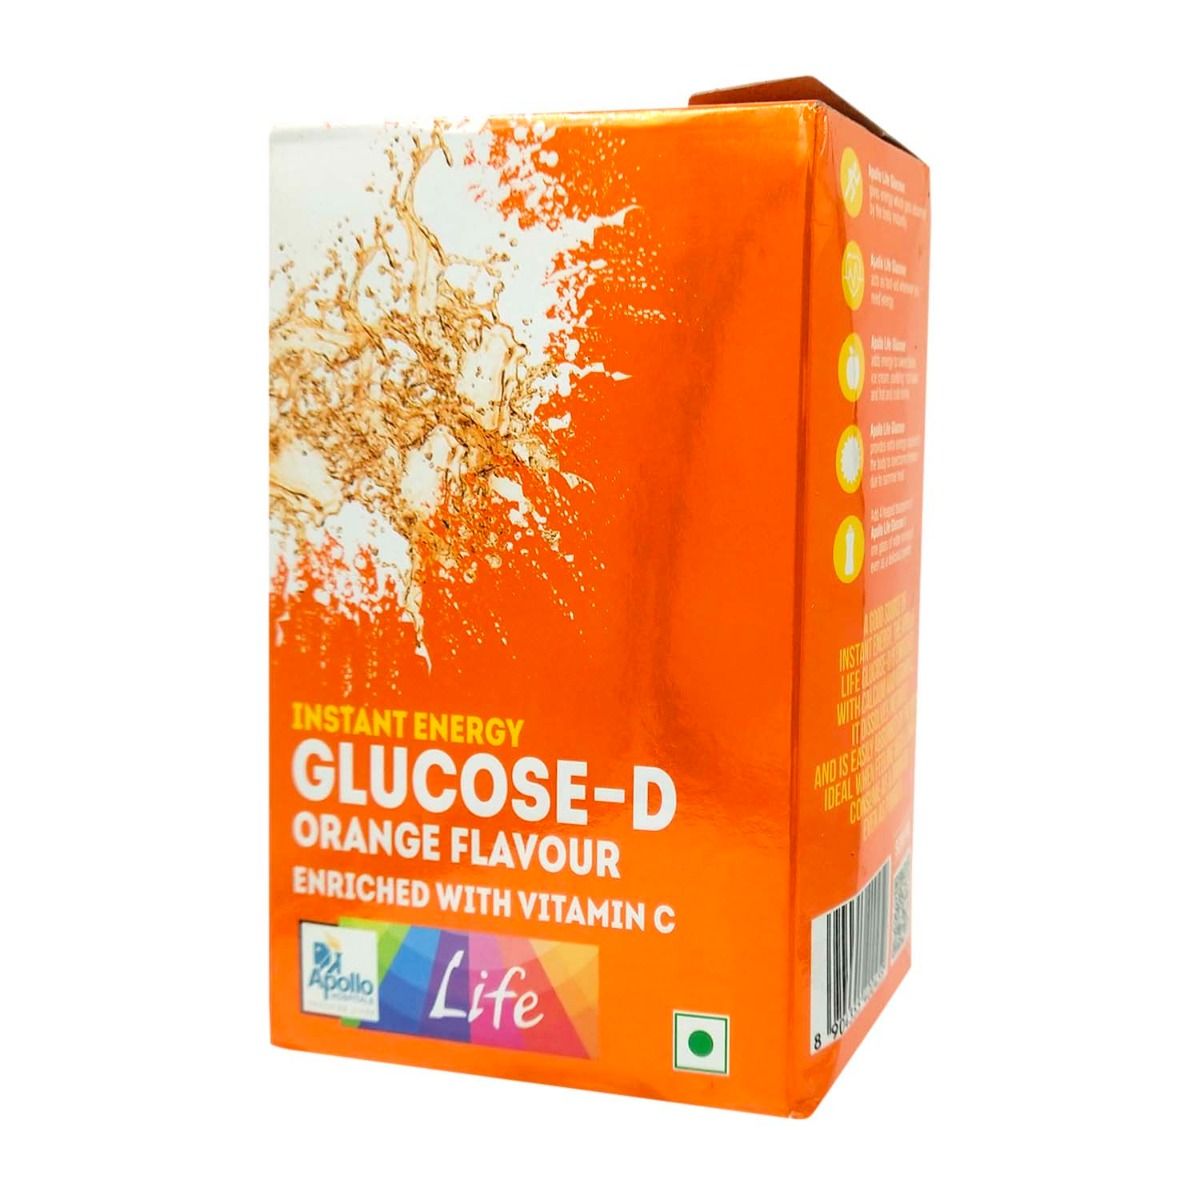 Apollo Life Glucose-D Orange Flavour Instant Energy Drink, 500 gm Refill Pack, Pack of 1 